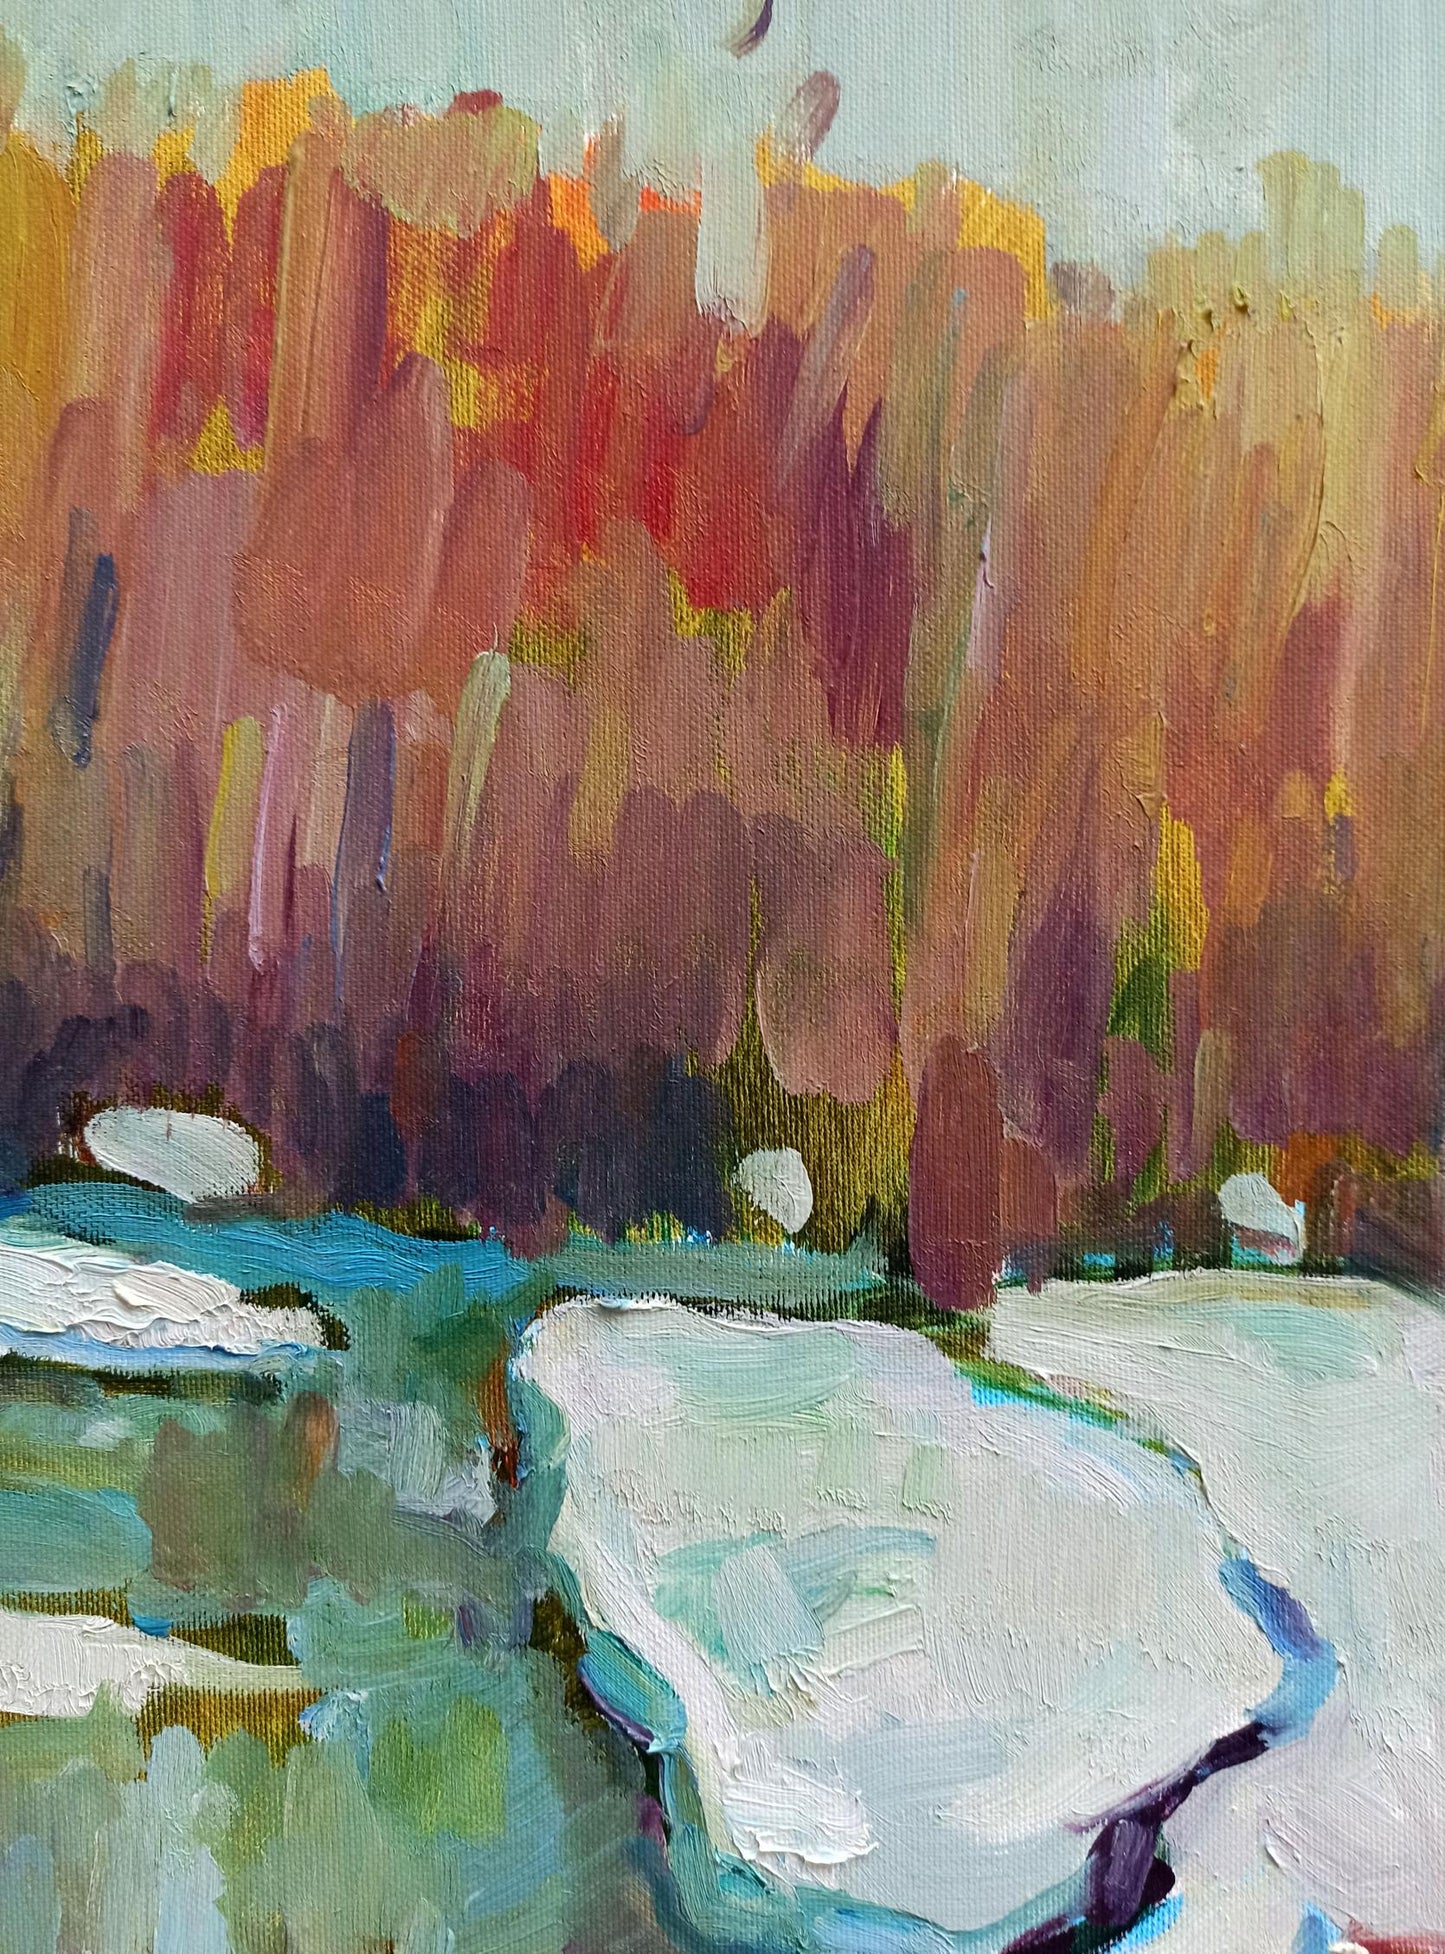 In his oil painting, Peter Dobrev captures the colors and energy of spring